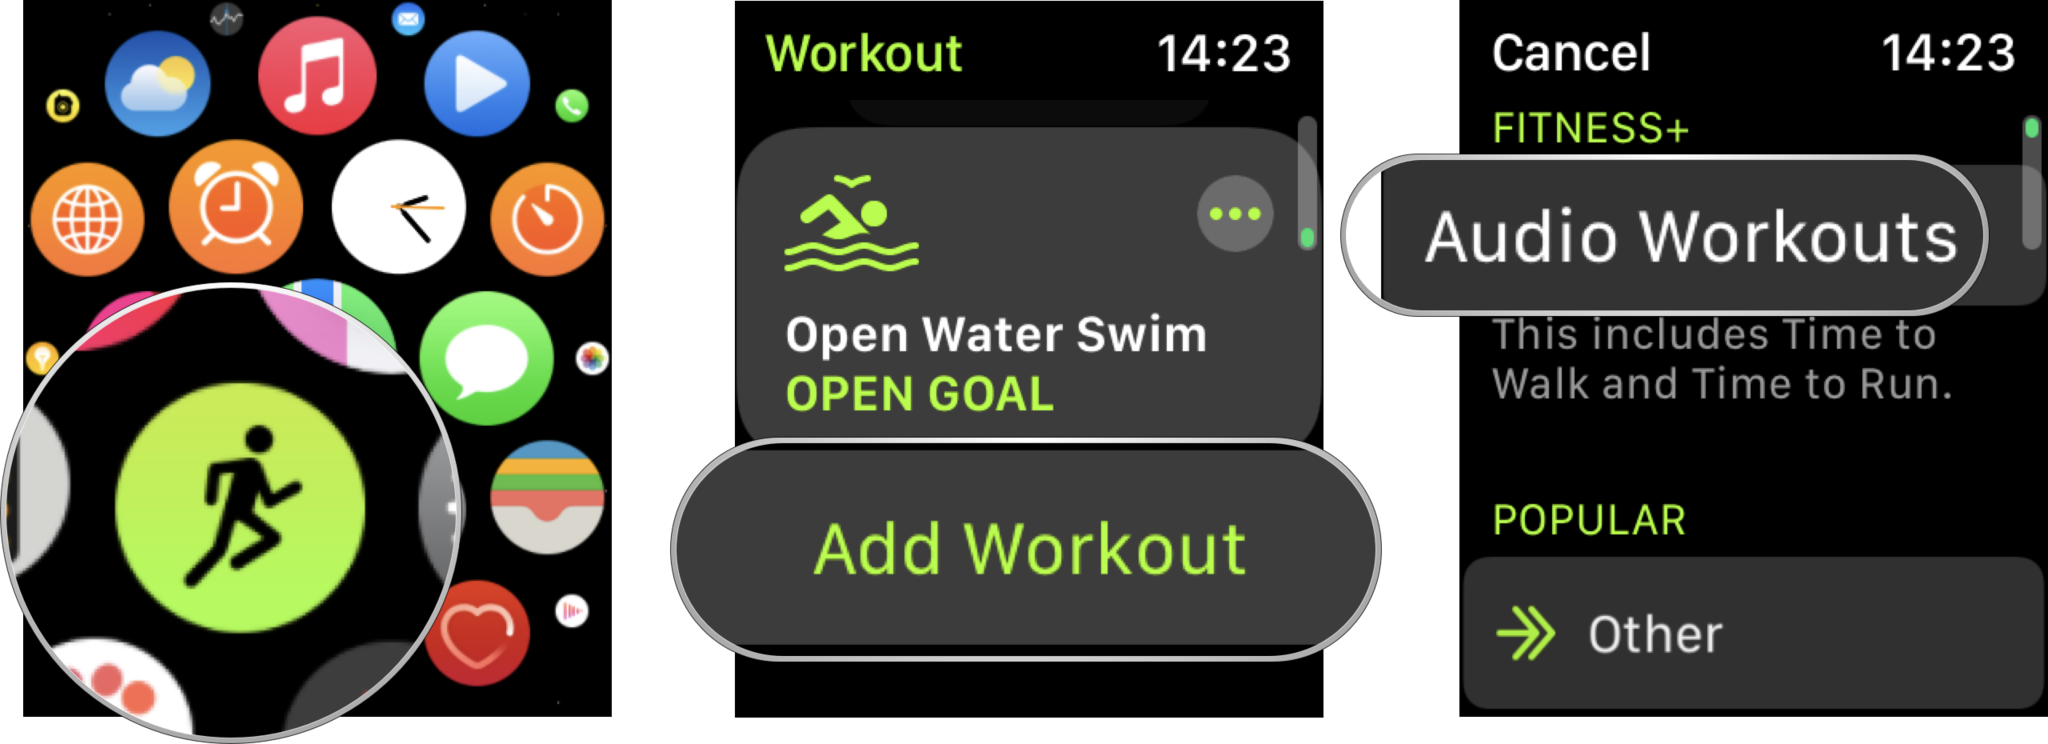 Re-enable Time to Walk and Time to Run workouts on Apple Watch: Open the Workout app, scroll to the bottom of the list and tap Add Workout, tap Audio Workouts.